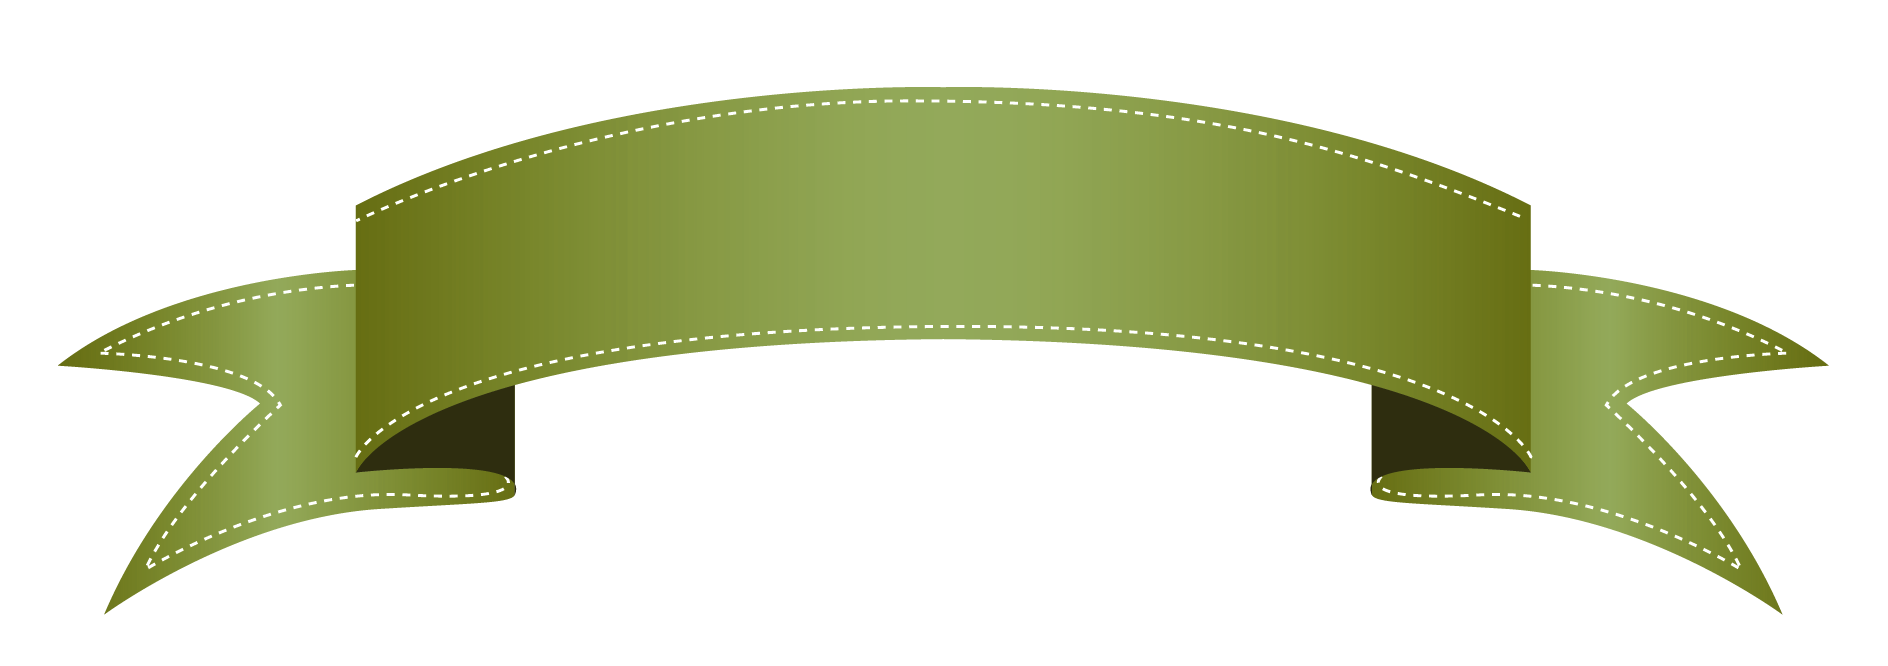 Green Transparent Banner Png Image Clipart